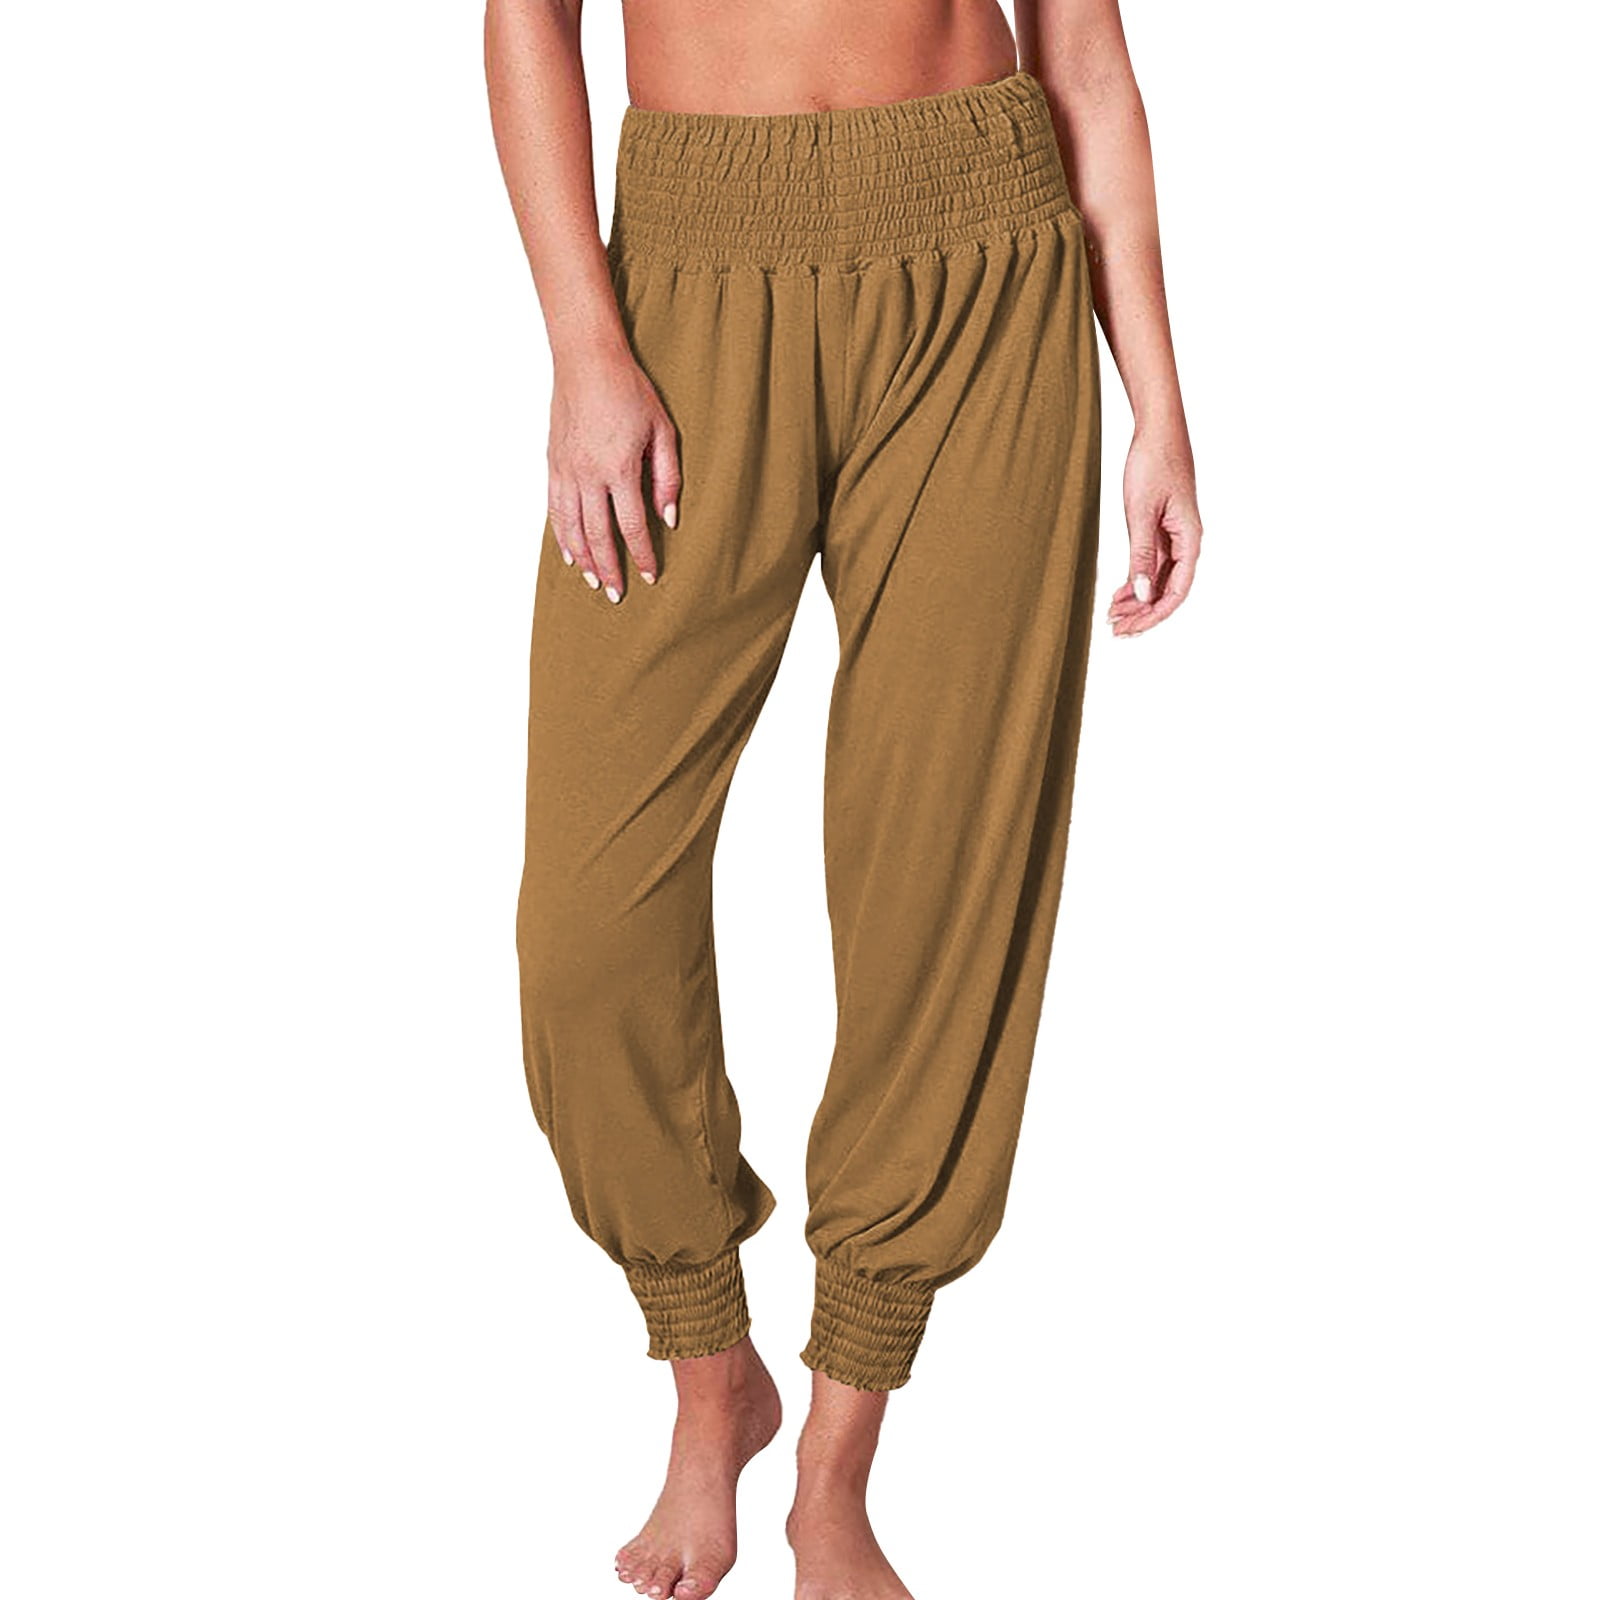 JDEFEG Pants for Women Womens Casual Business Attire Womens Yoga Loose  Workout Sweat Pants Comfy Pants with Pockets Light Summer Pants Women's  Pants Polyester,Spandex Coffee Xxl 